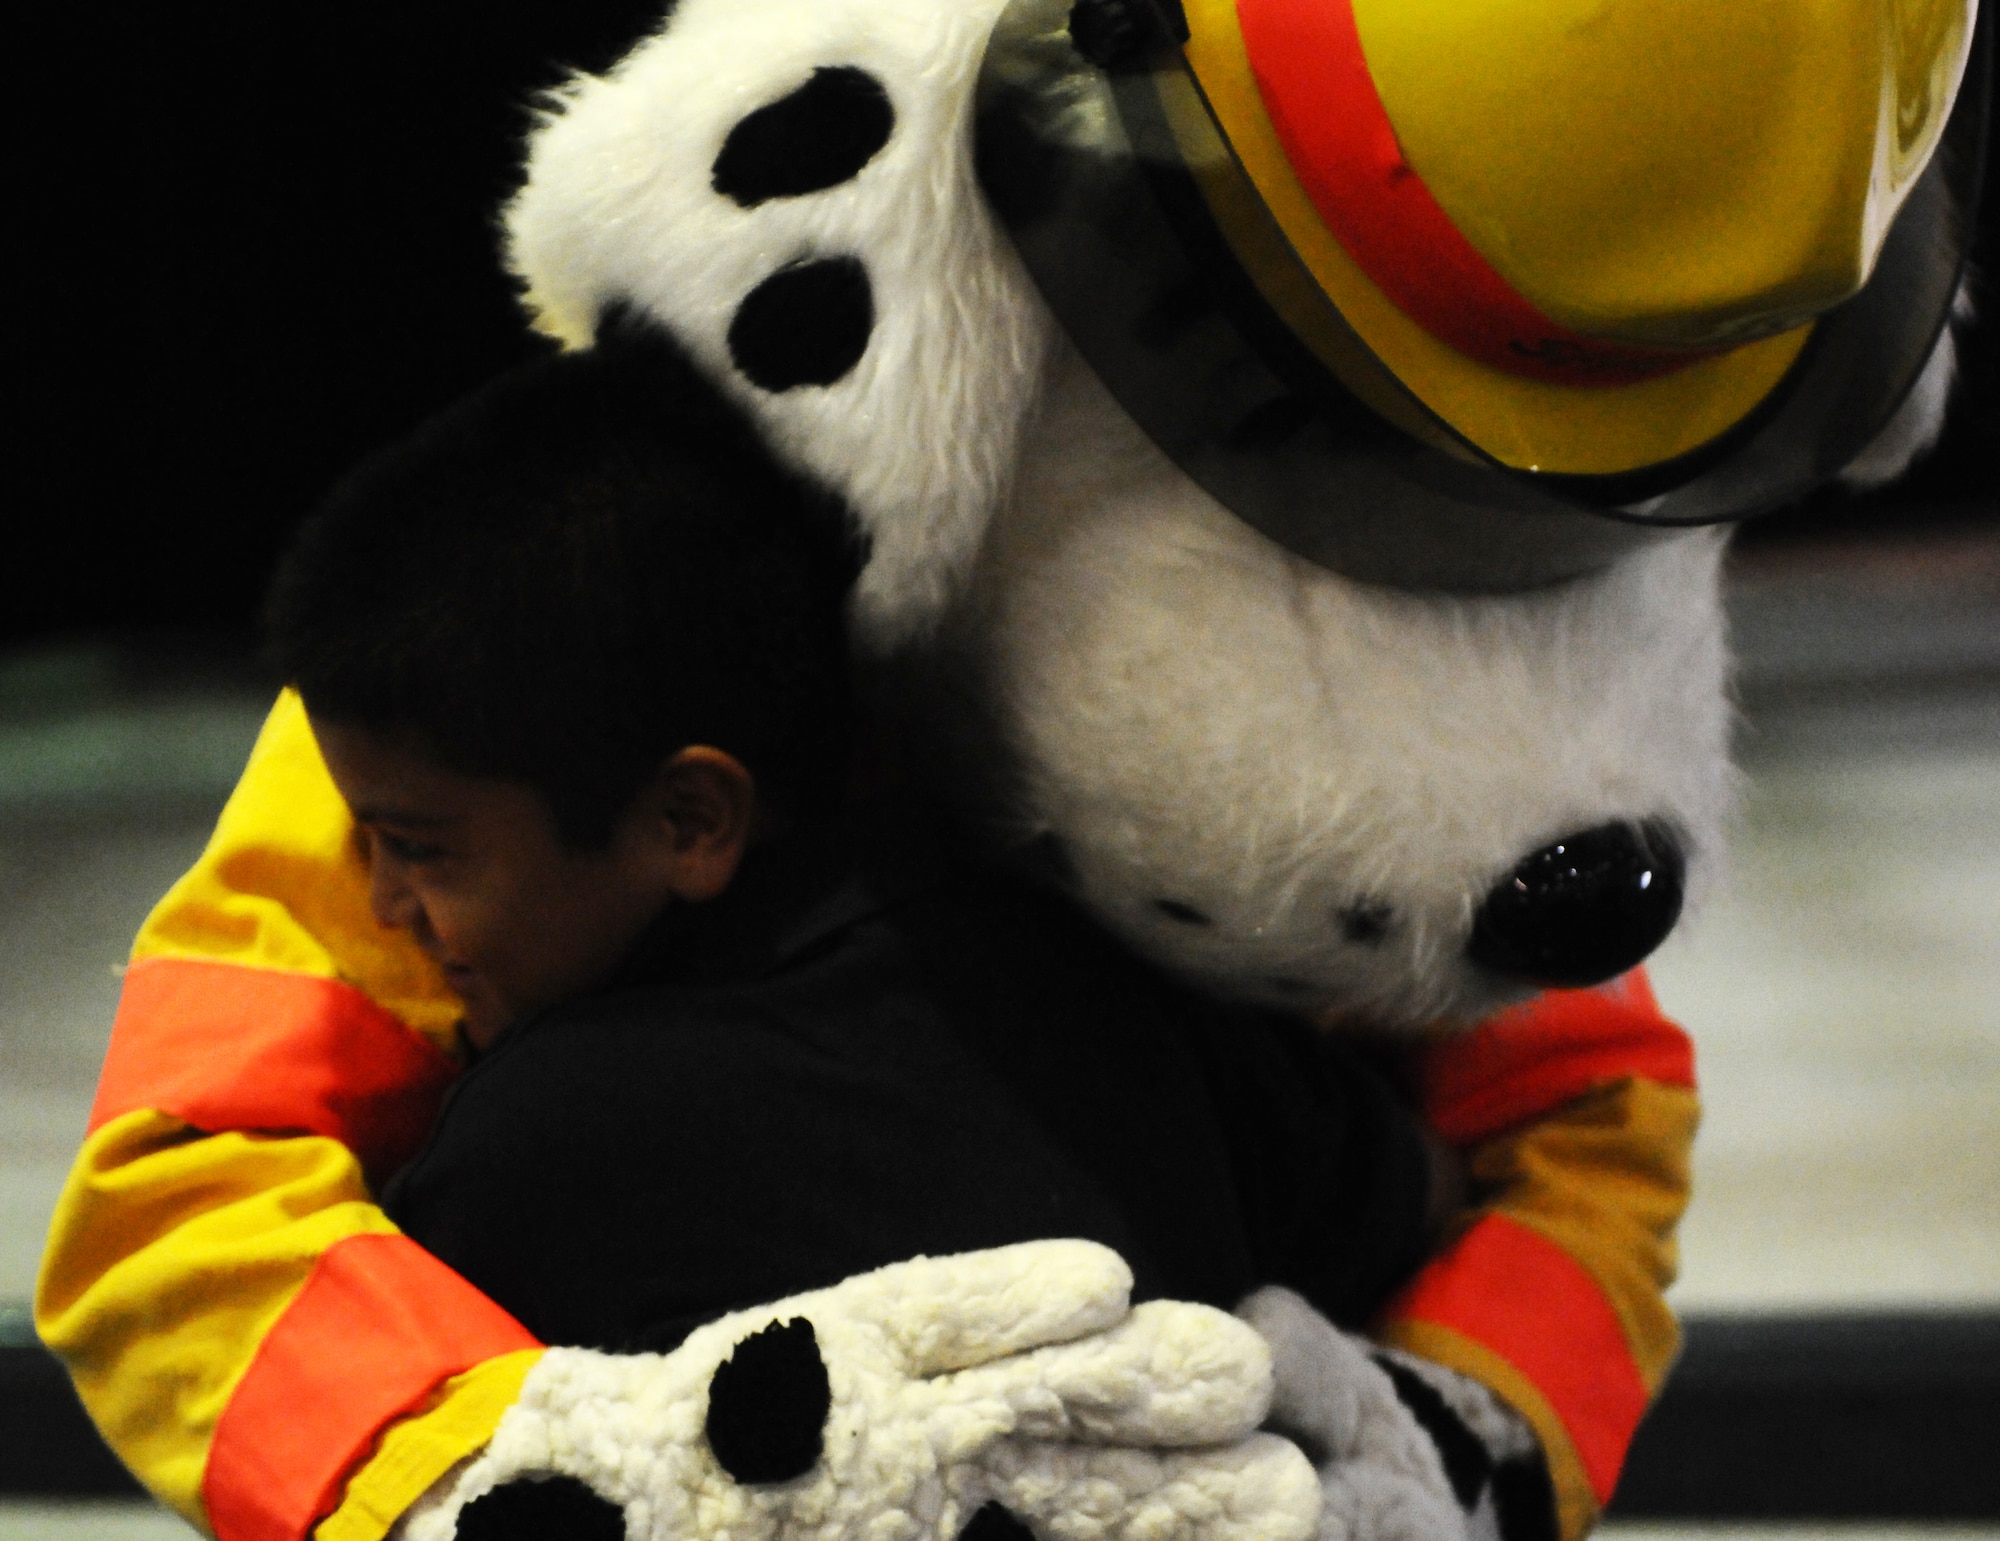 ANDERSEN AIR FORCE BASE, Guam—Sparky the Dog hugs a child from the Andersen Elementary School during a visit here, Oct. 13. The Andersen Fire and Emergency flight held nearly 30 classes to inform school children about fire prevention. (U.S. Air Force photo by Senior Airman Benjamin Wiseman/Released)